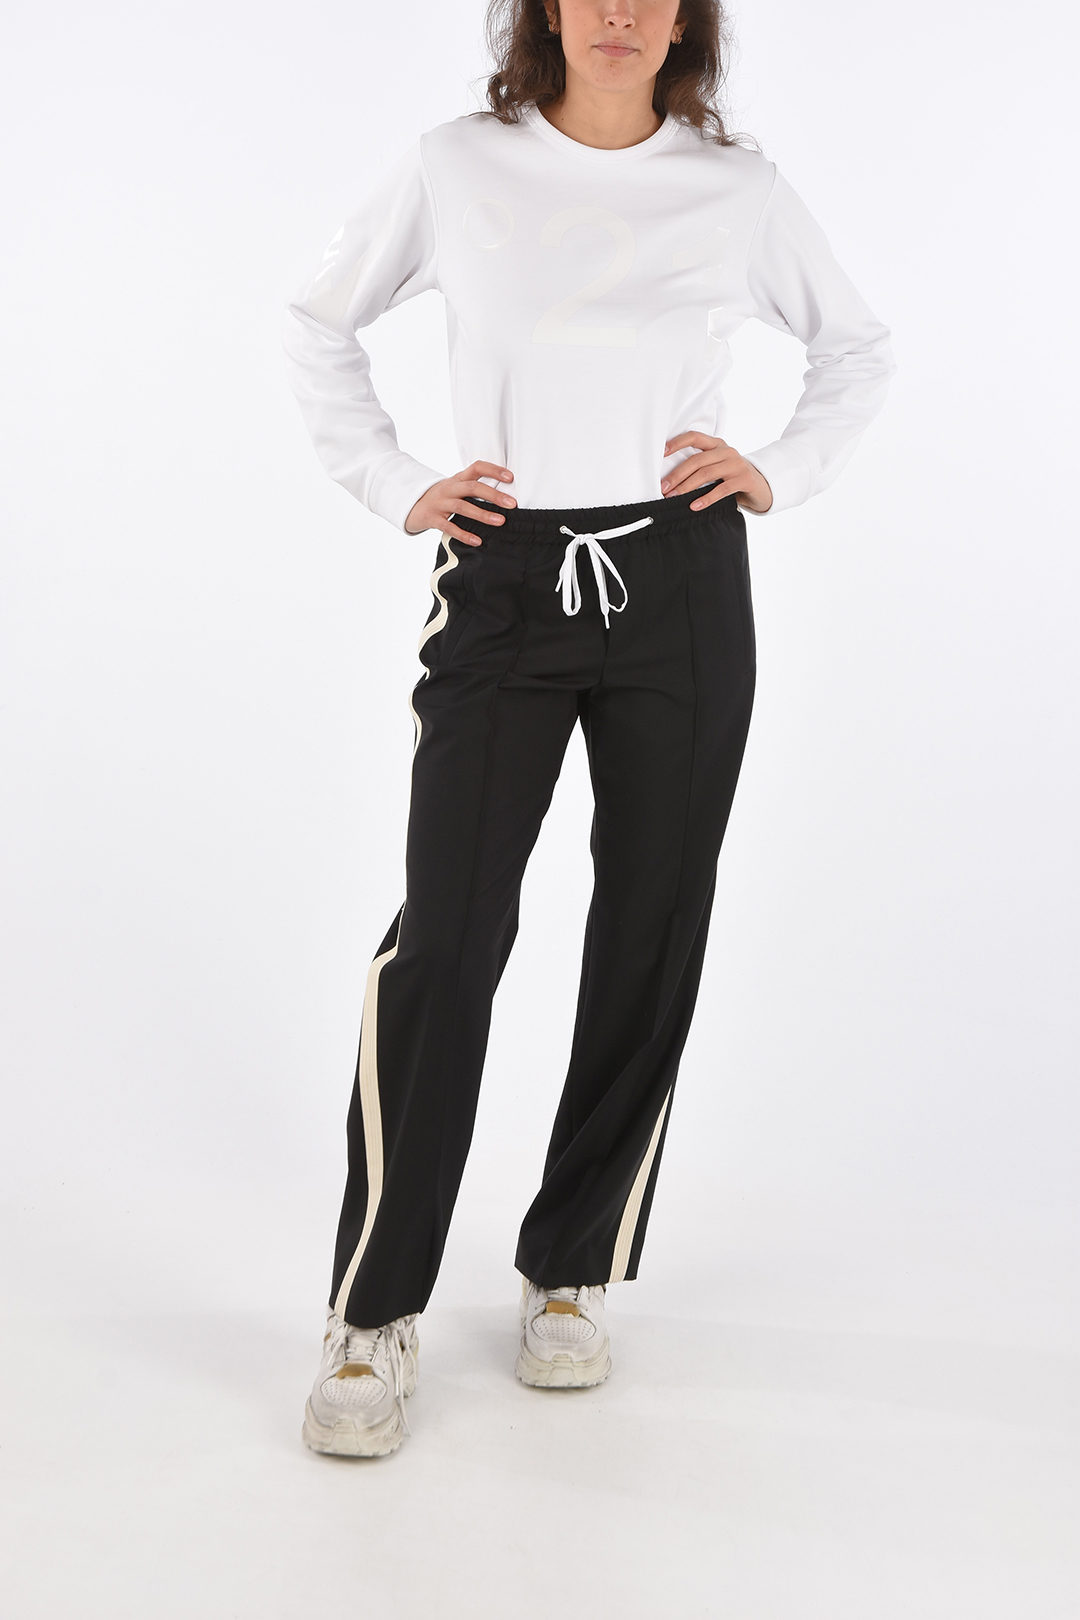 Women's Drawstring Pant with Piping